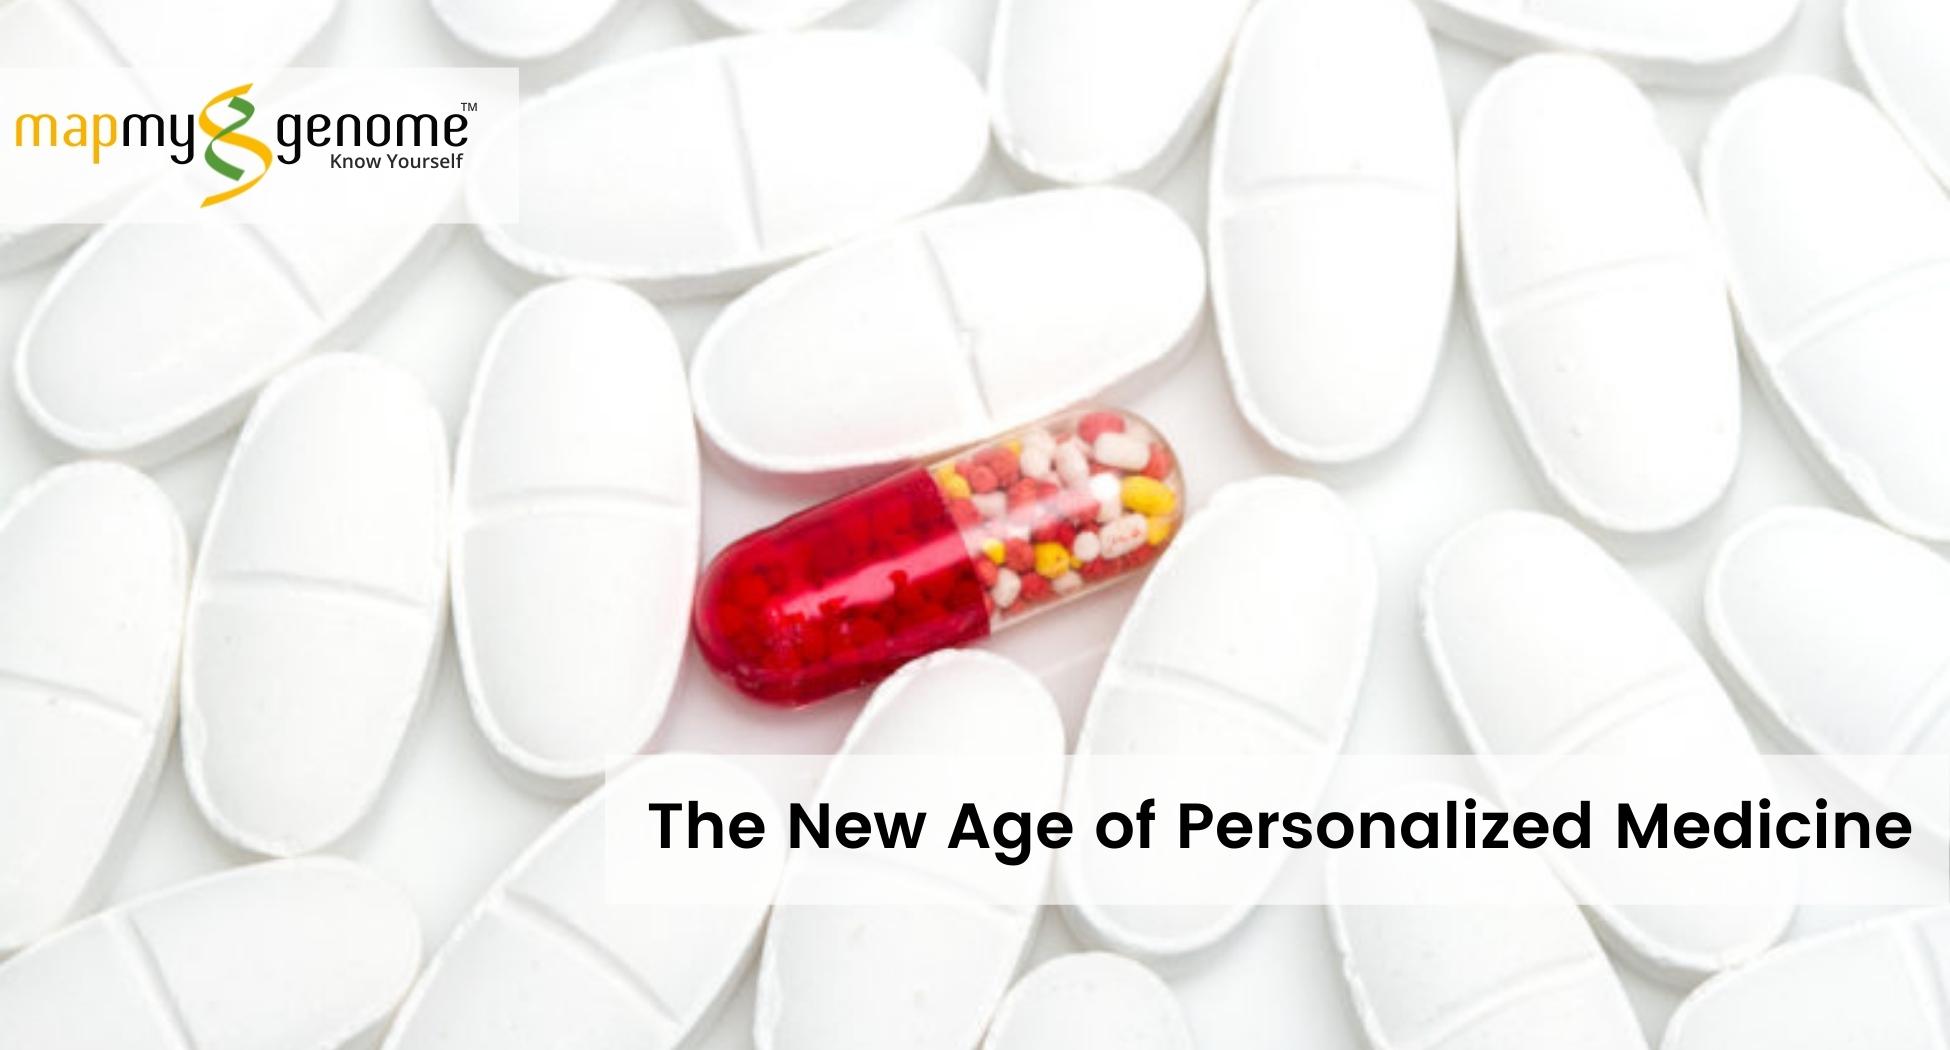 The New Age of Personalized Medicine